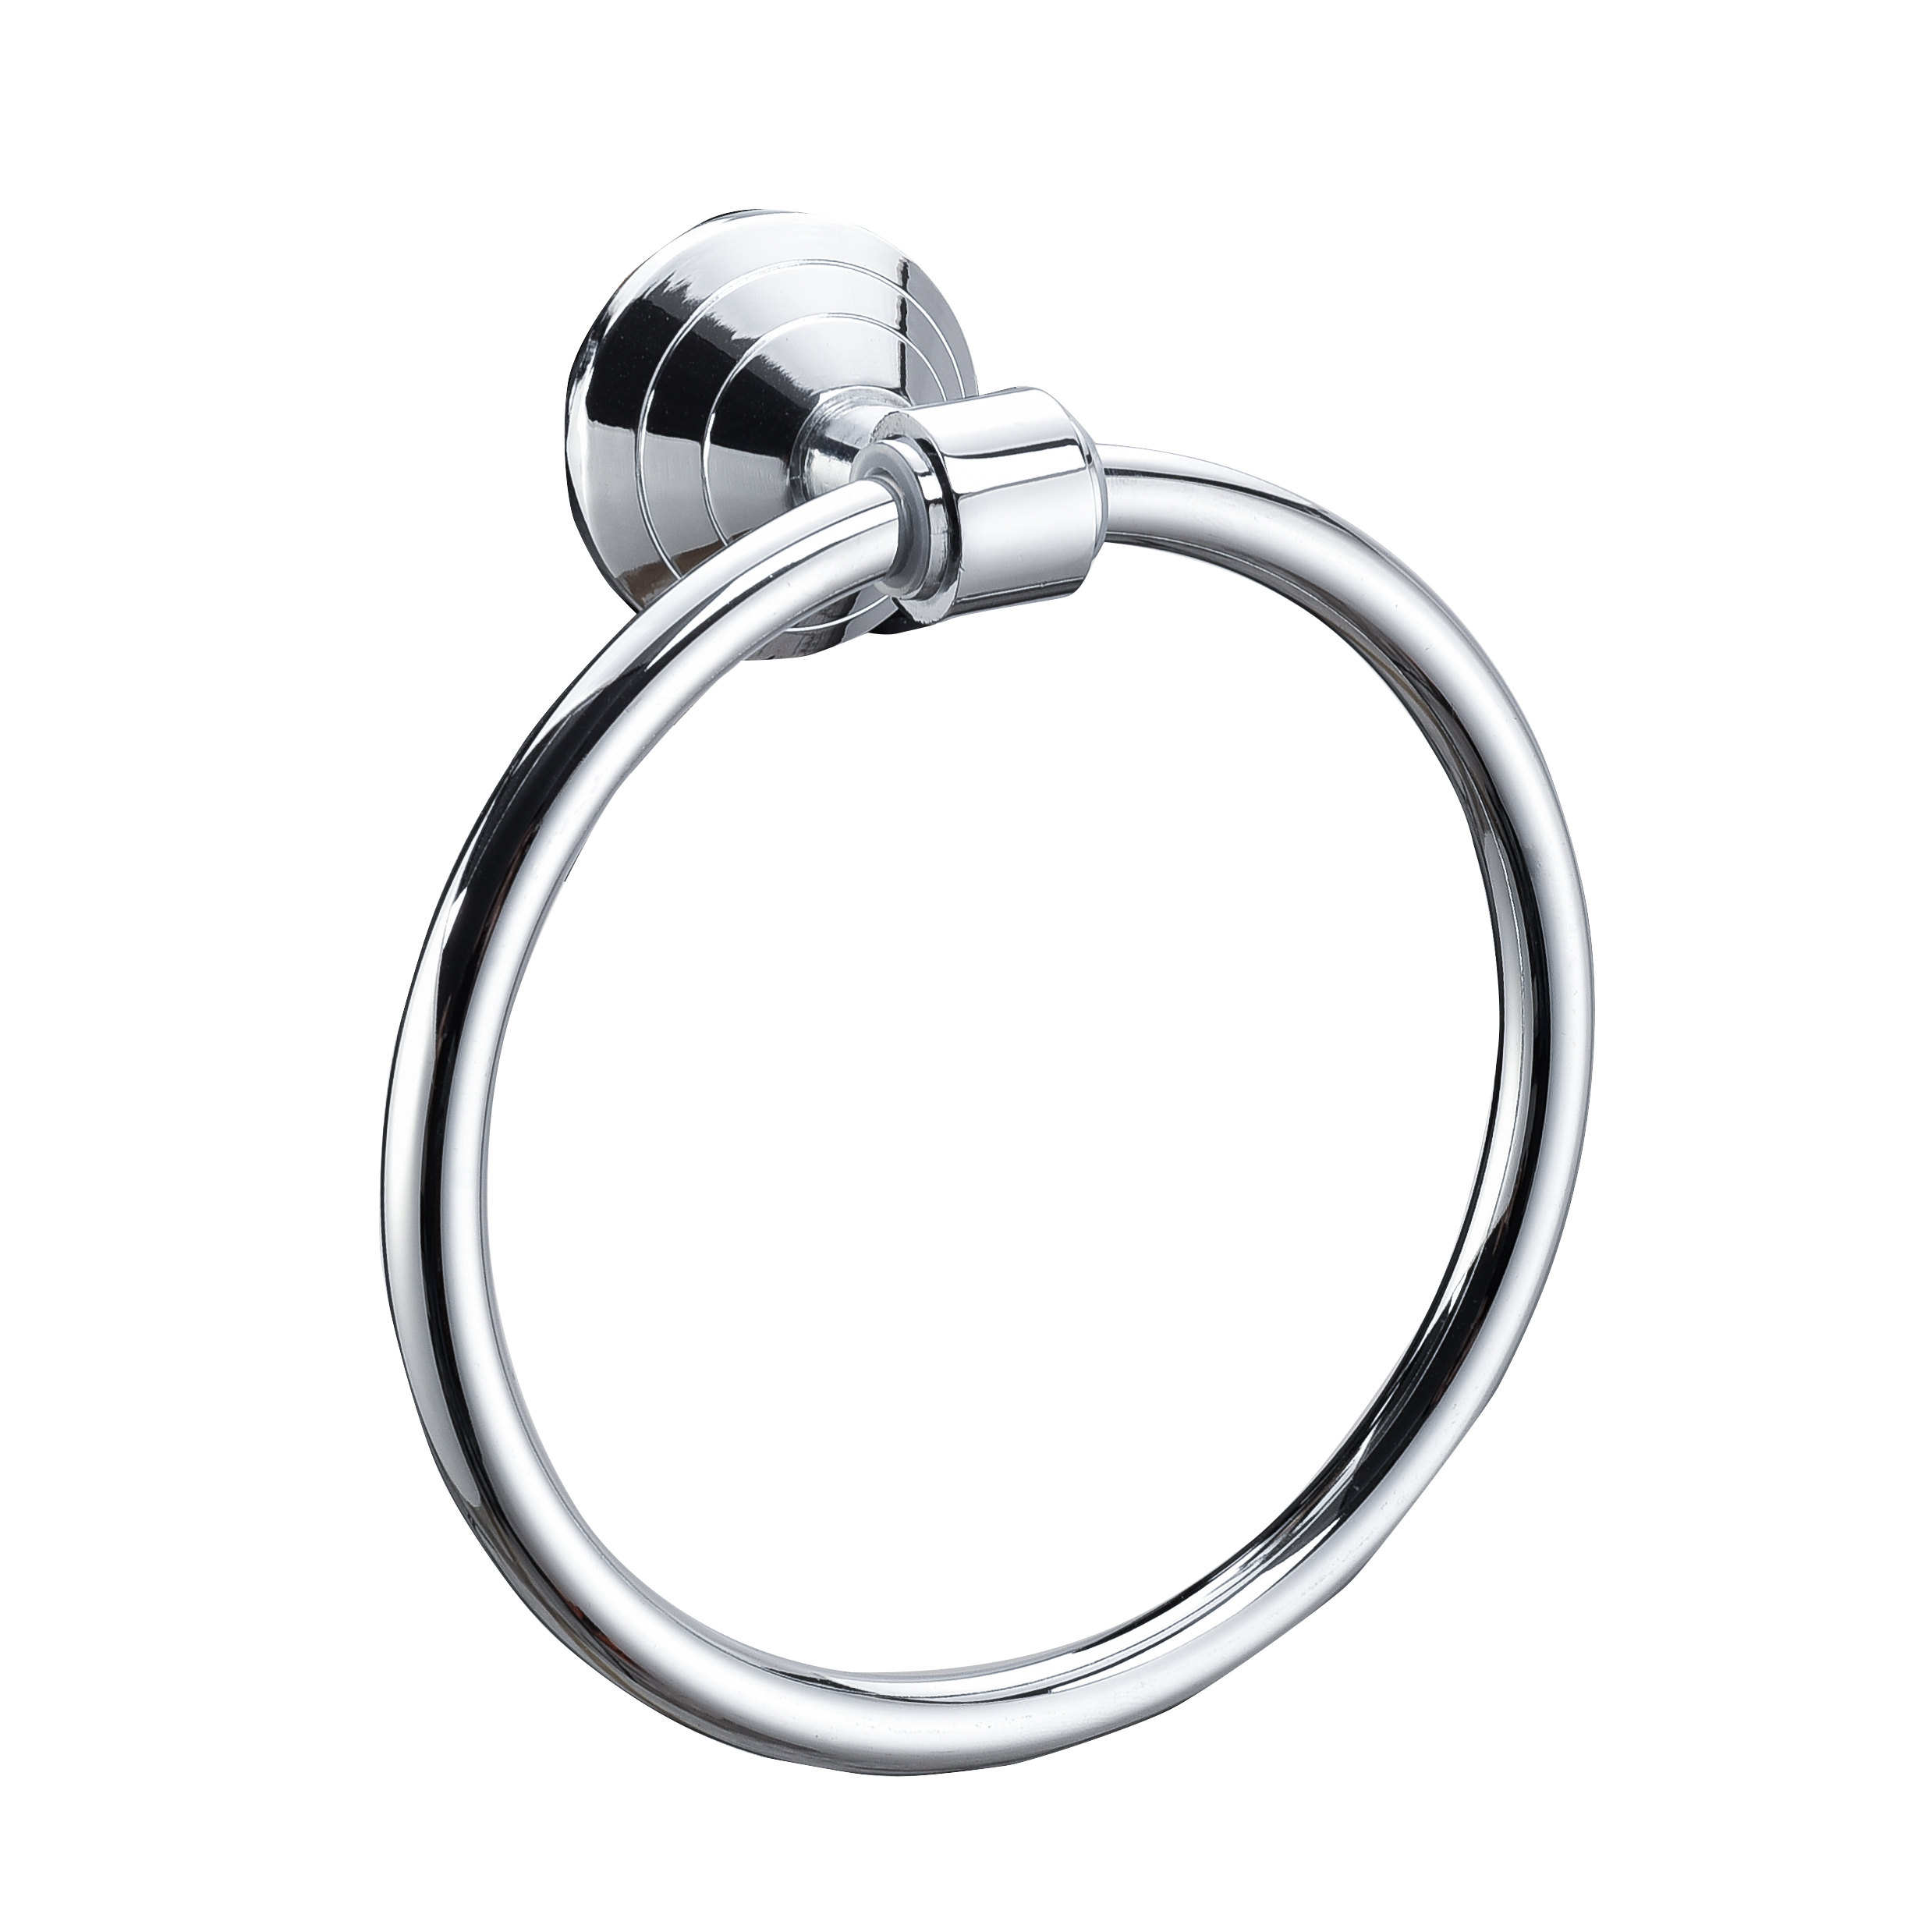 Chinese Professional High Quality Towel Ring - Bathroom Zinc Wall Mounted towel Holder Chrome Brushed Towel Ring 13207 – Bodi